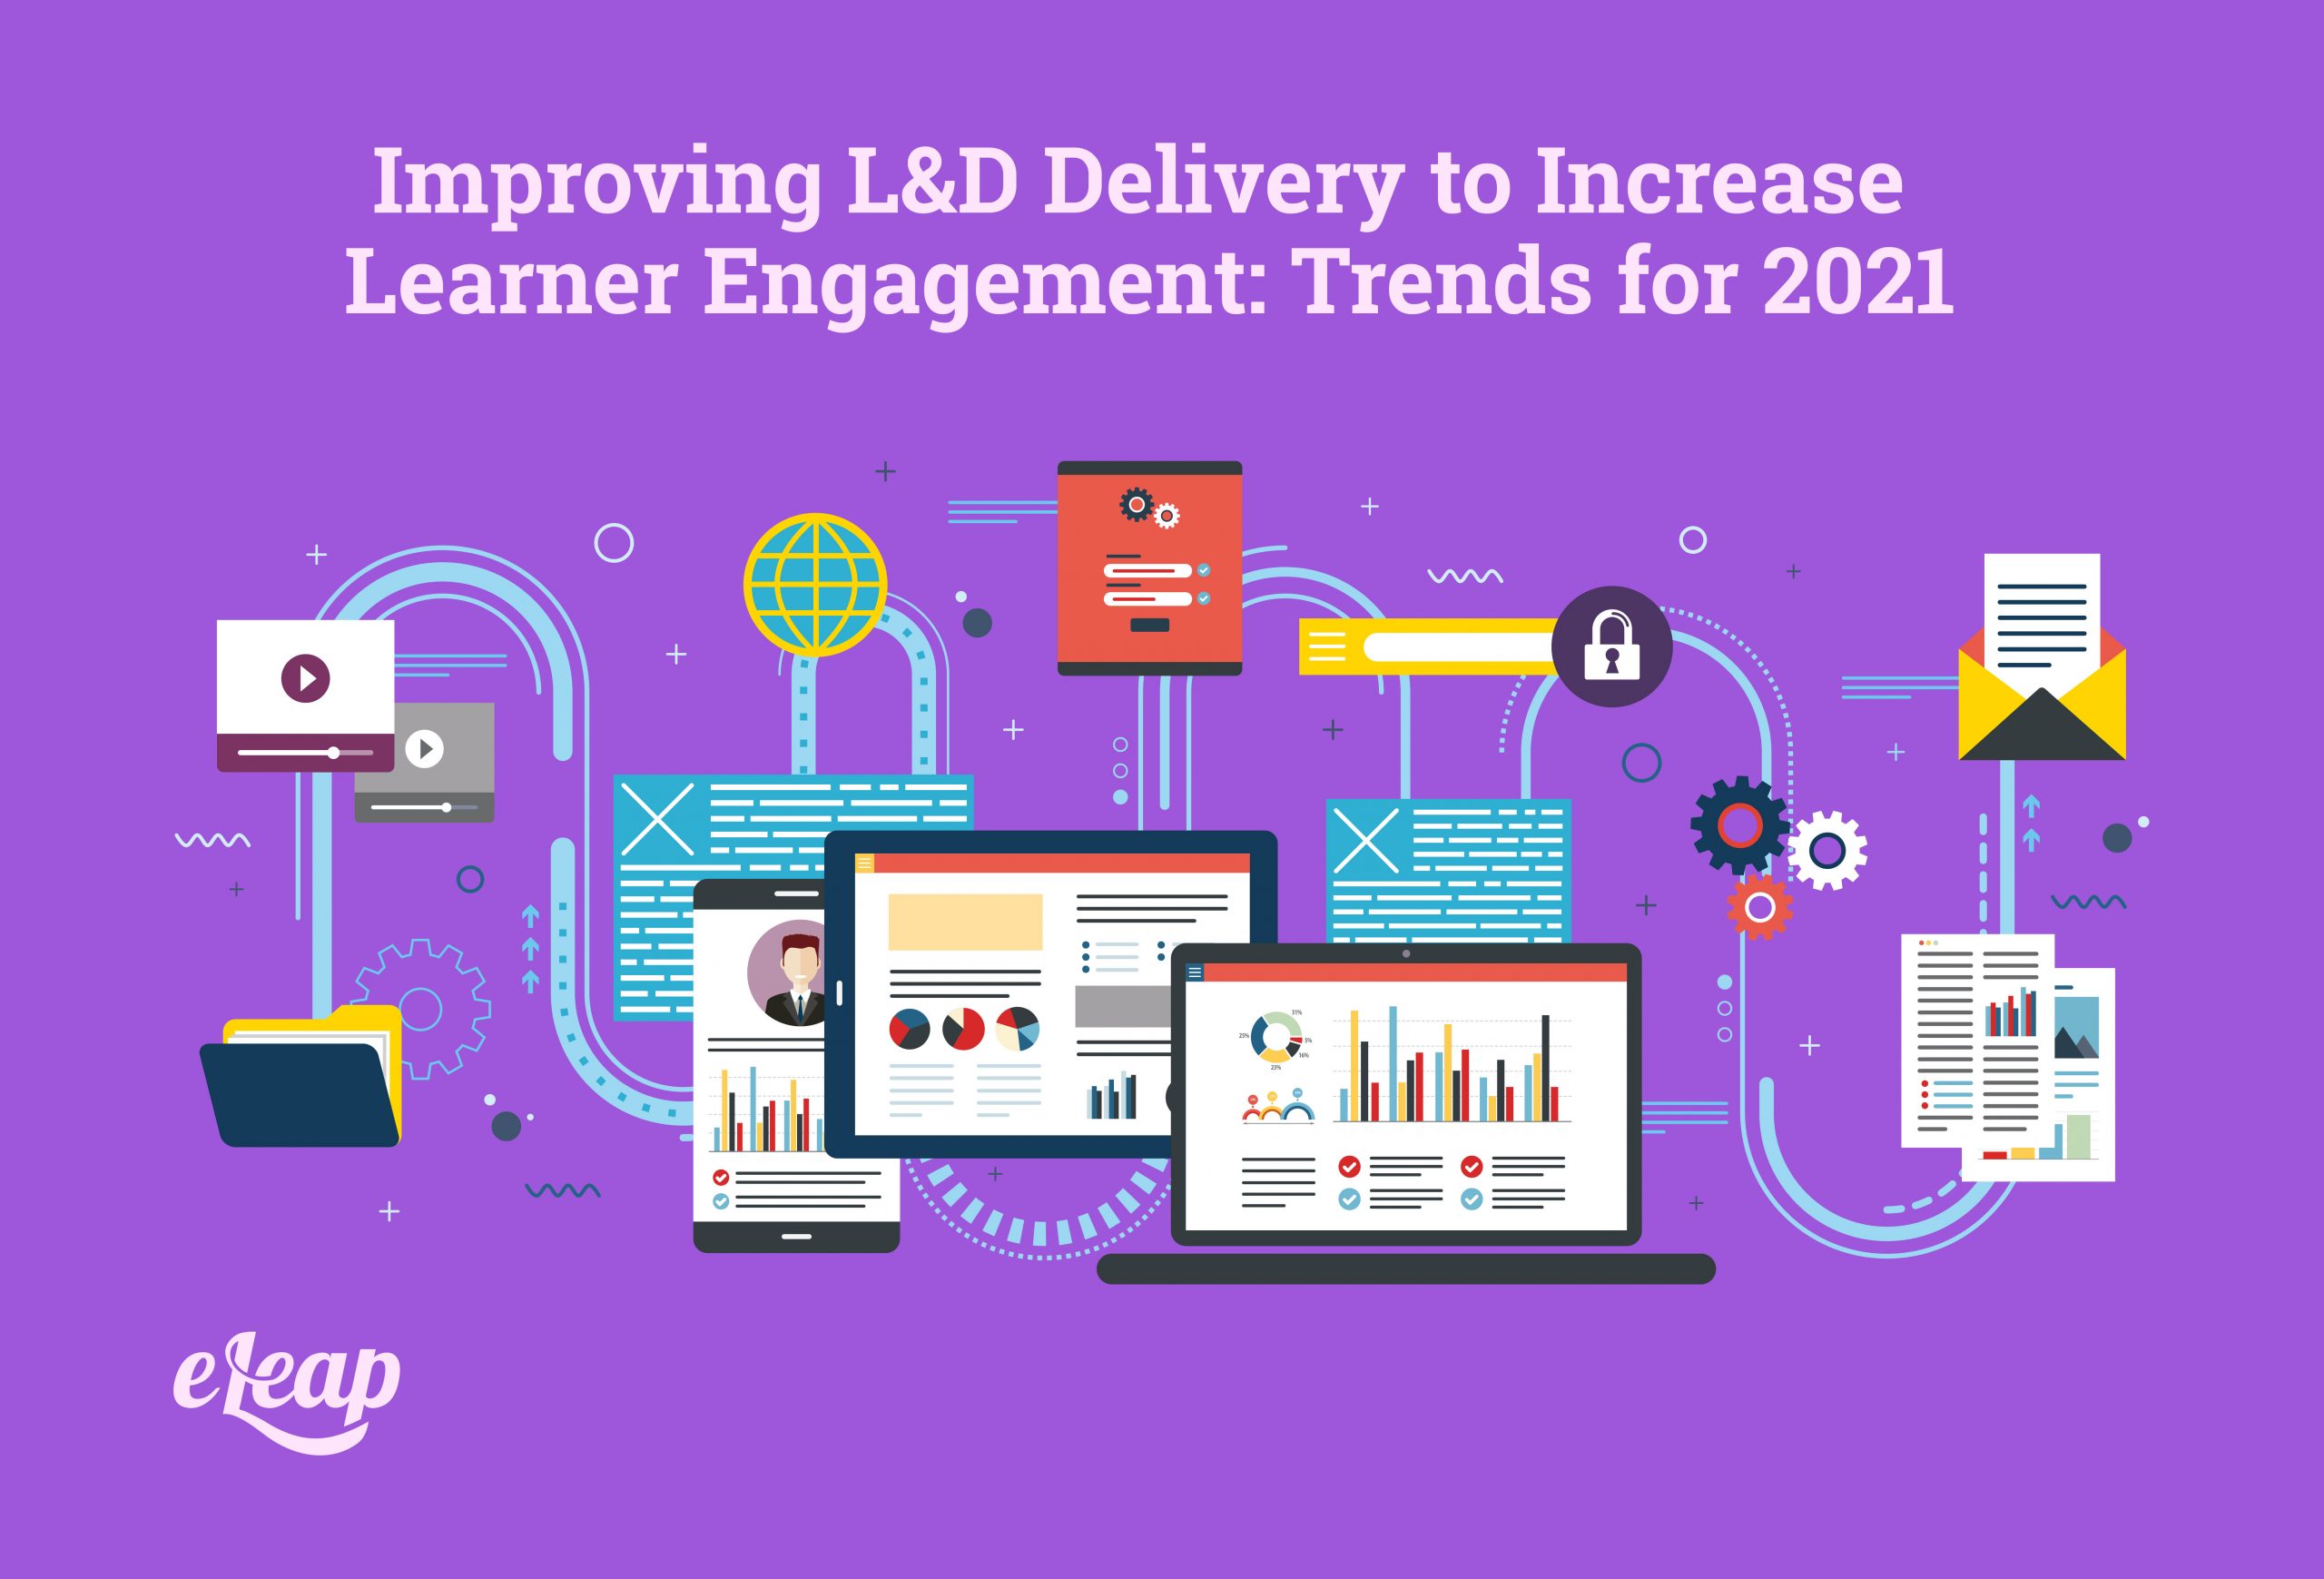 Improving L&D Delivery to Increase Learner Engagement: Trends for 2021